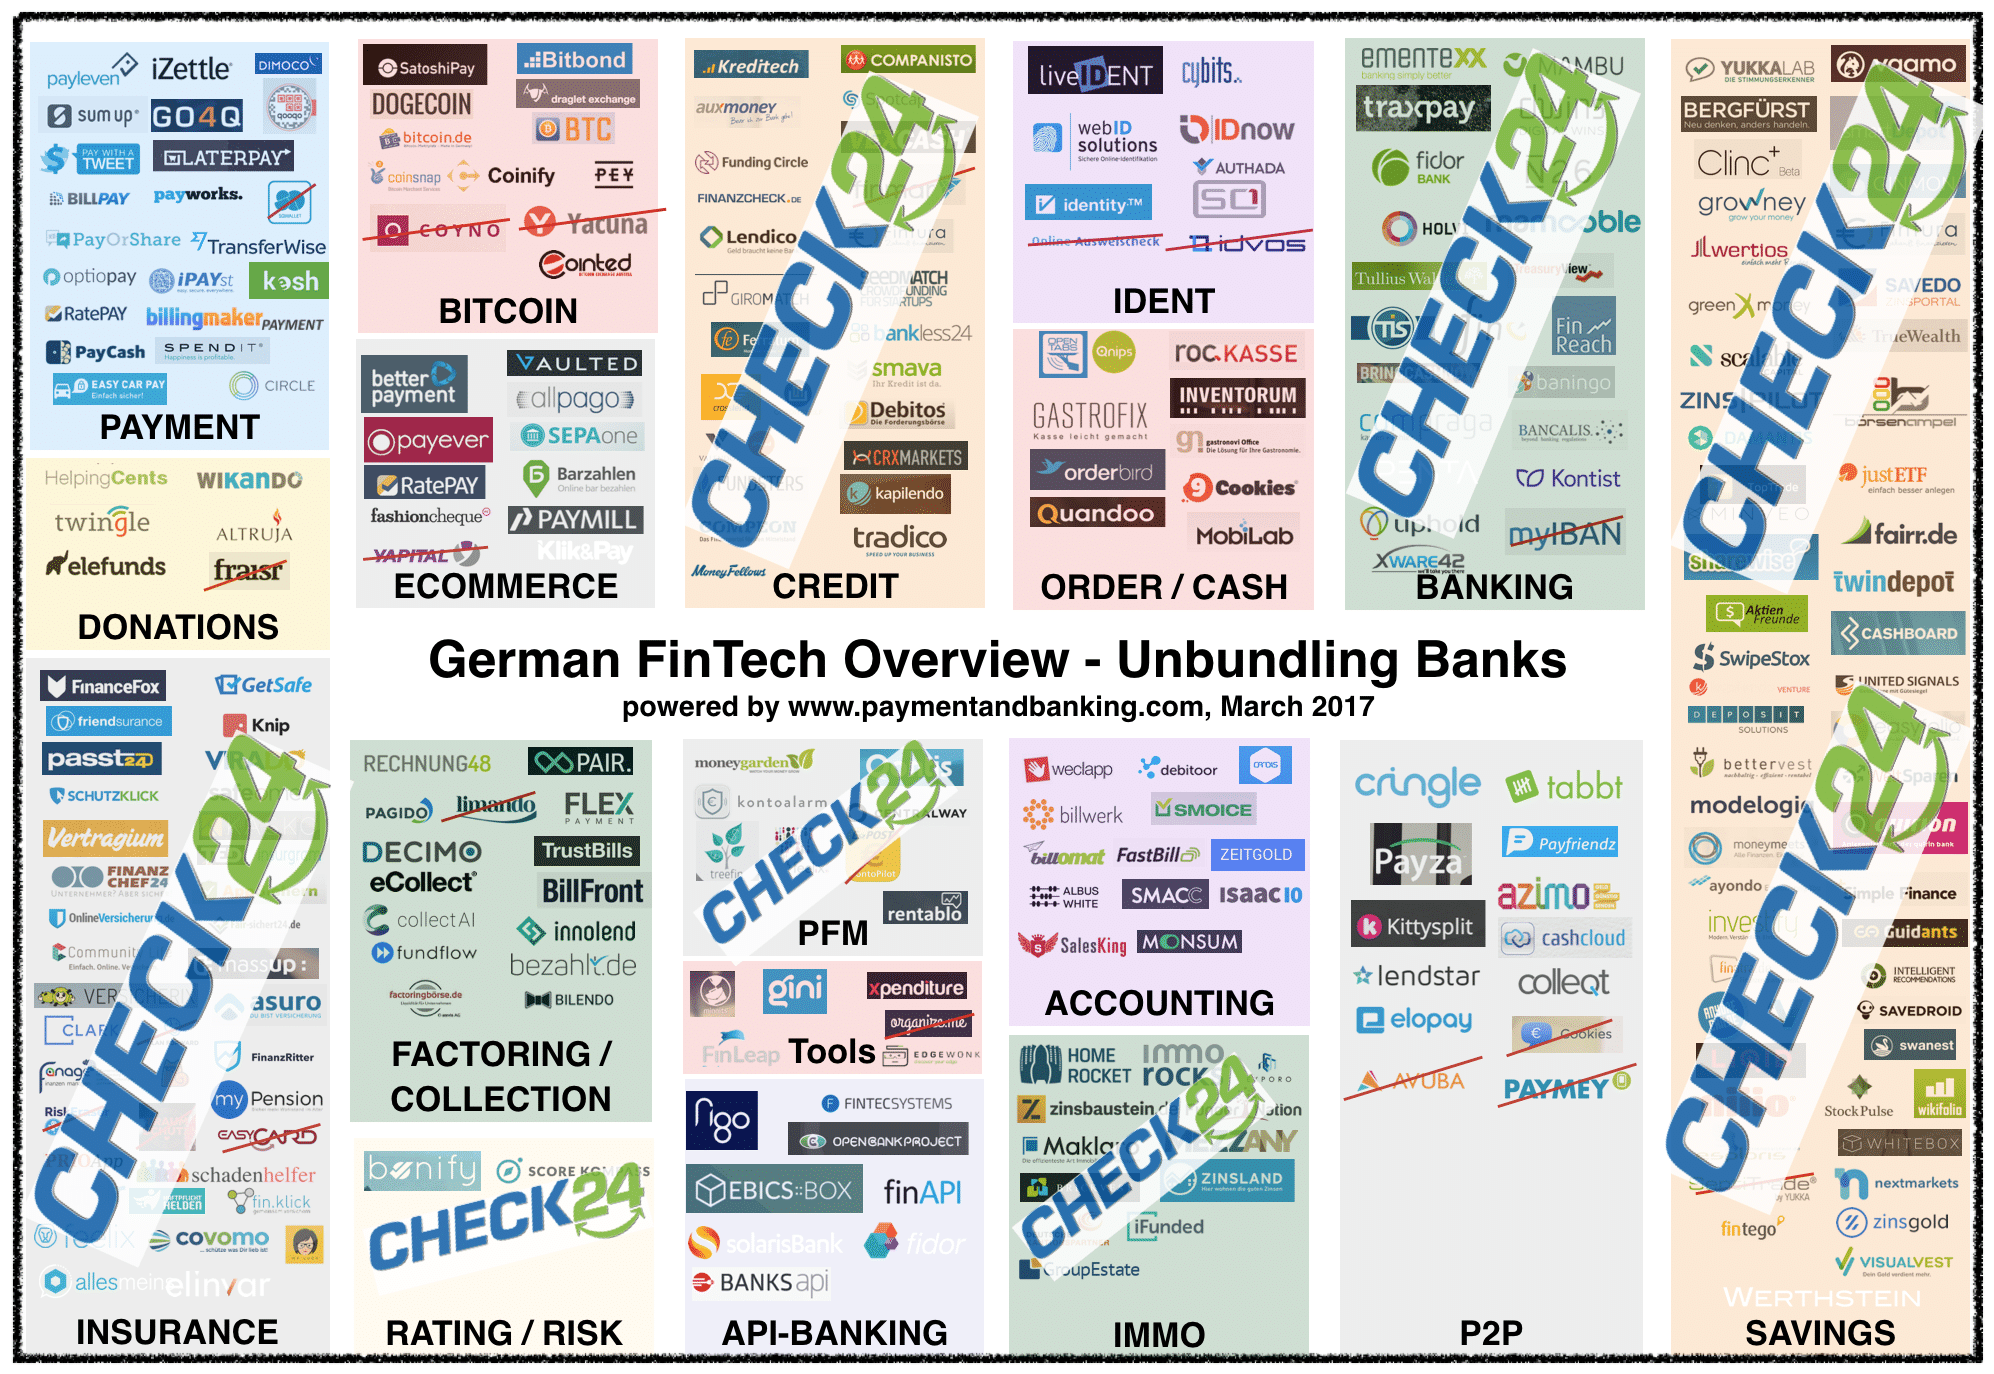 Check24 is eating the German FinTech world